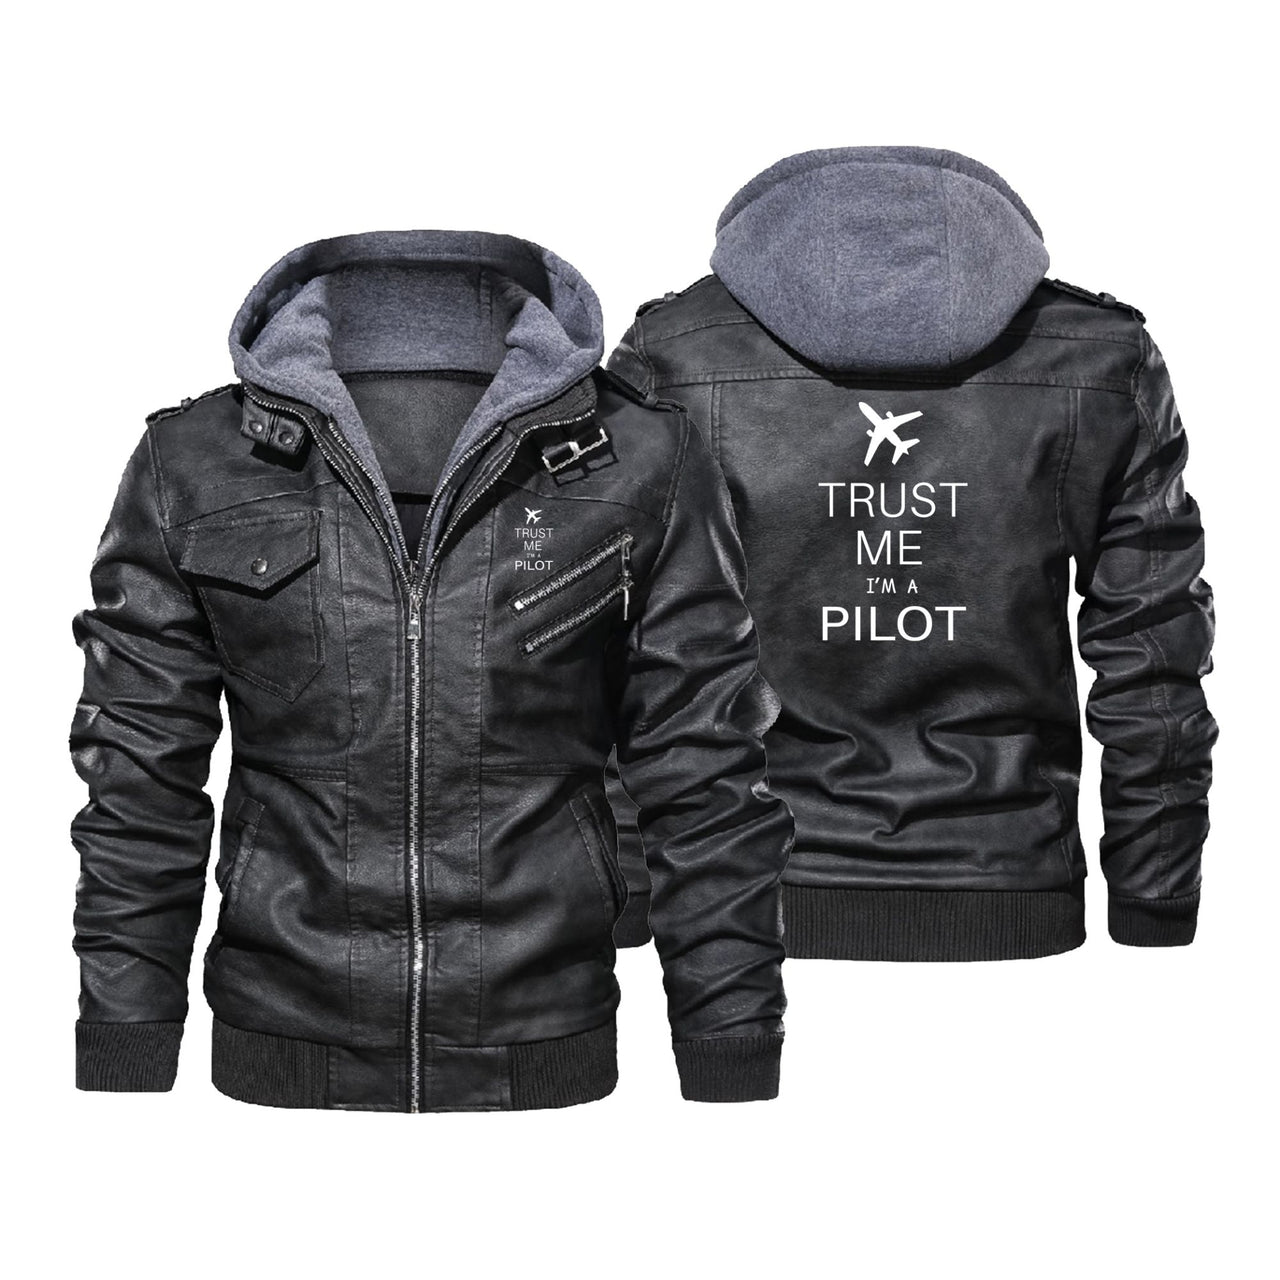 Trust Me I'm a Pilot 2 Designed Hooded Leather Jackets